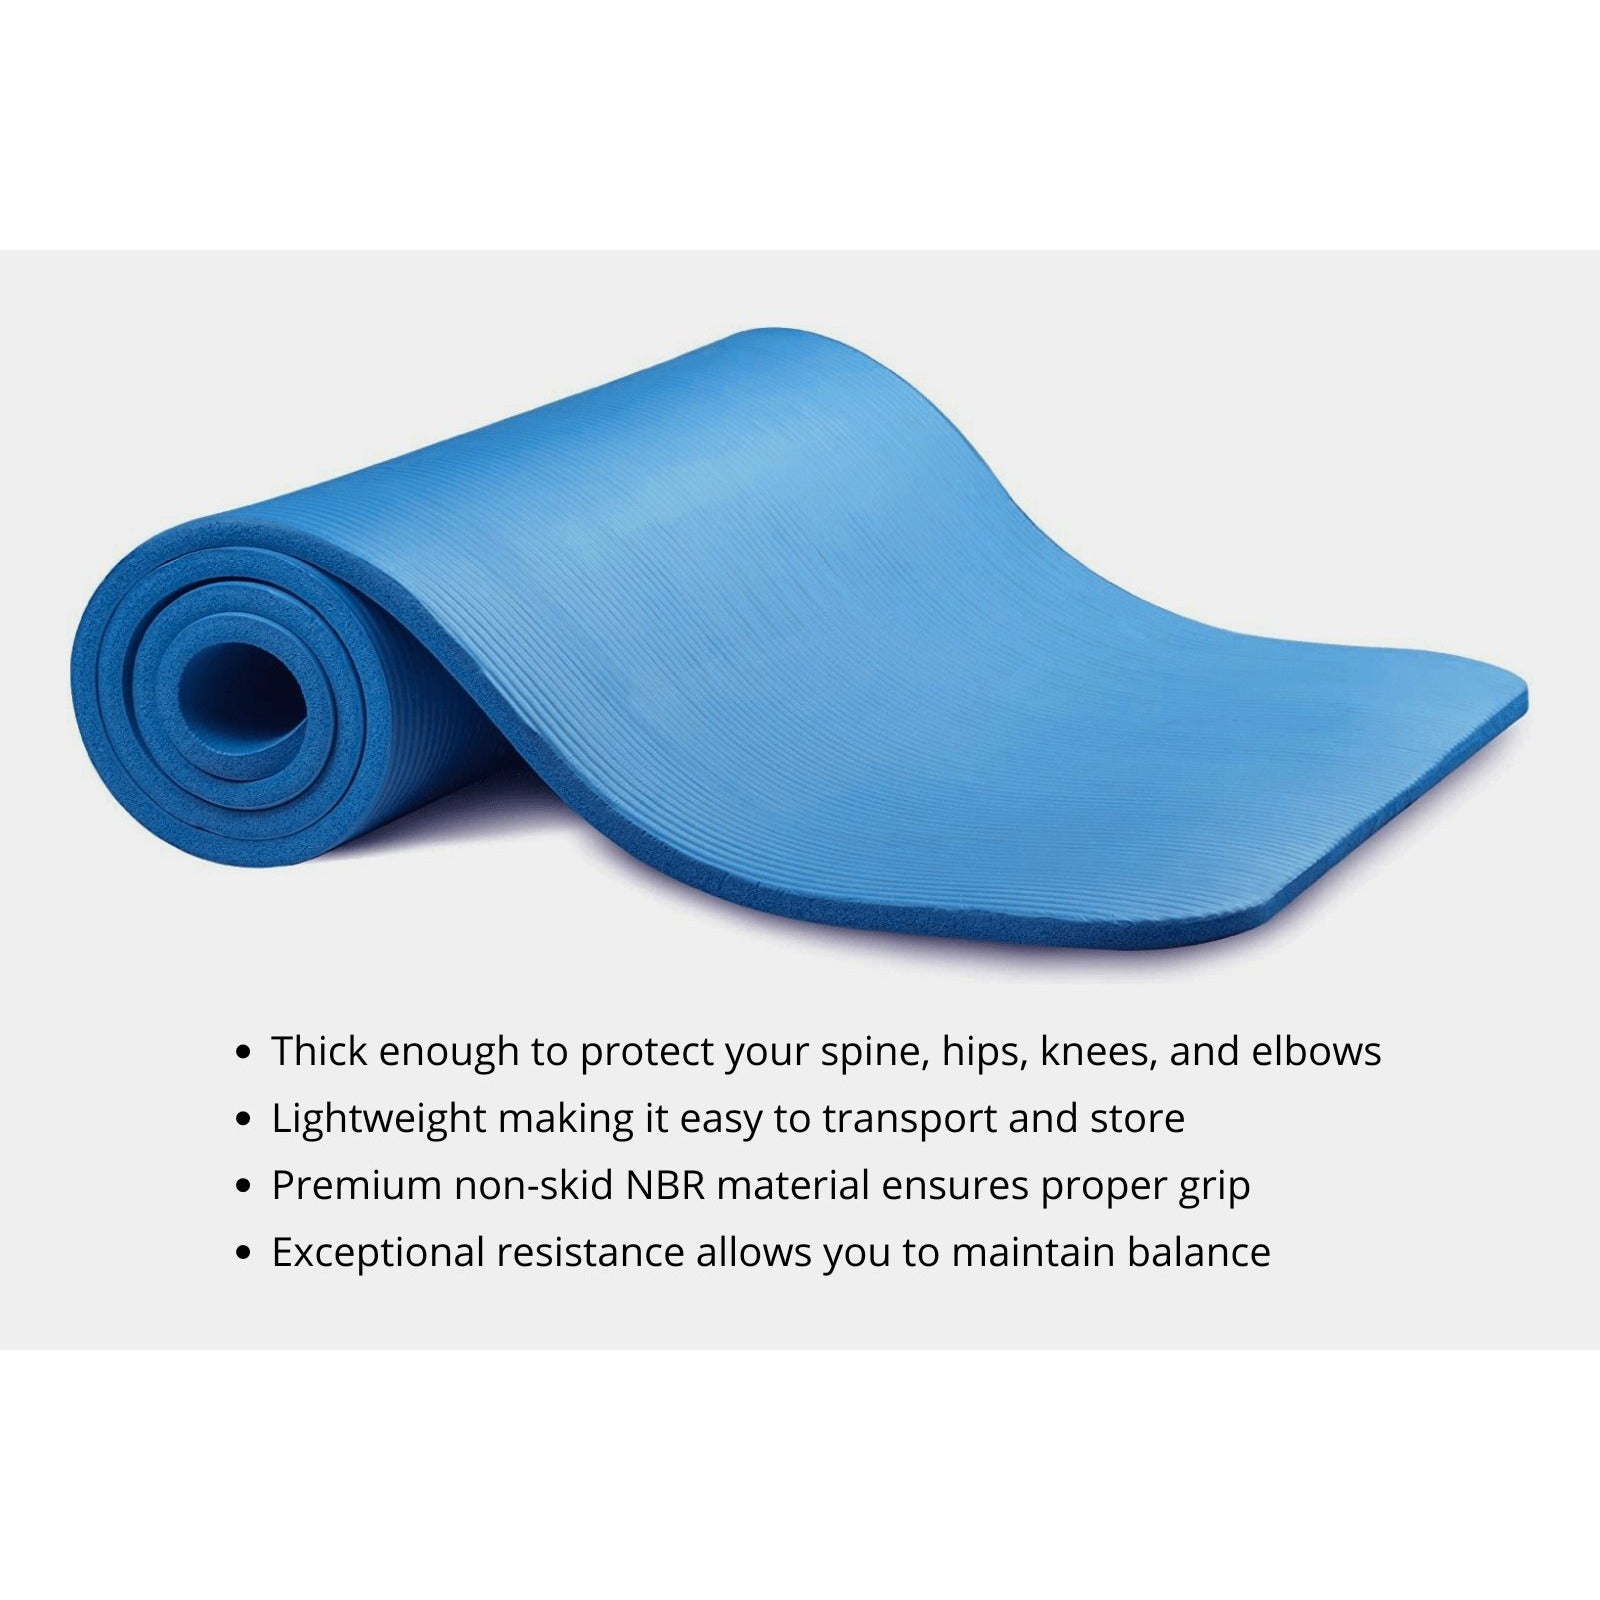 Thick Yoga and Pilates Exercise Mat with Carrying Strap - KME means the very best